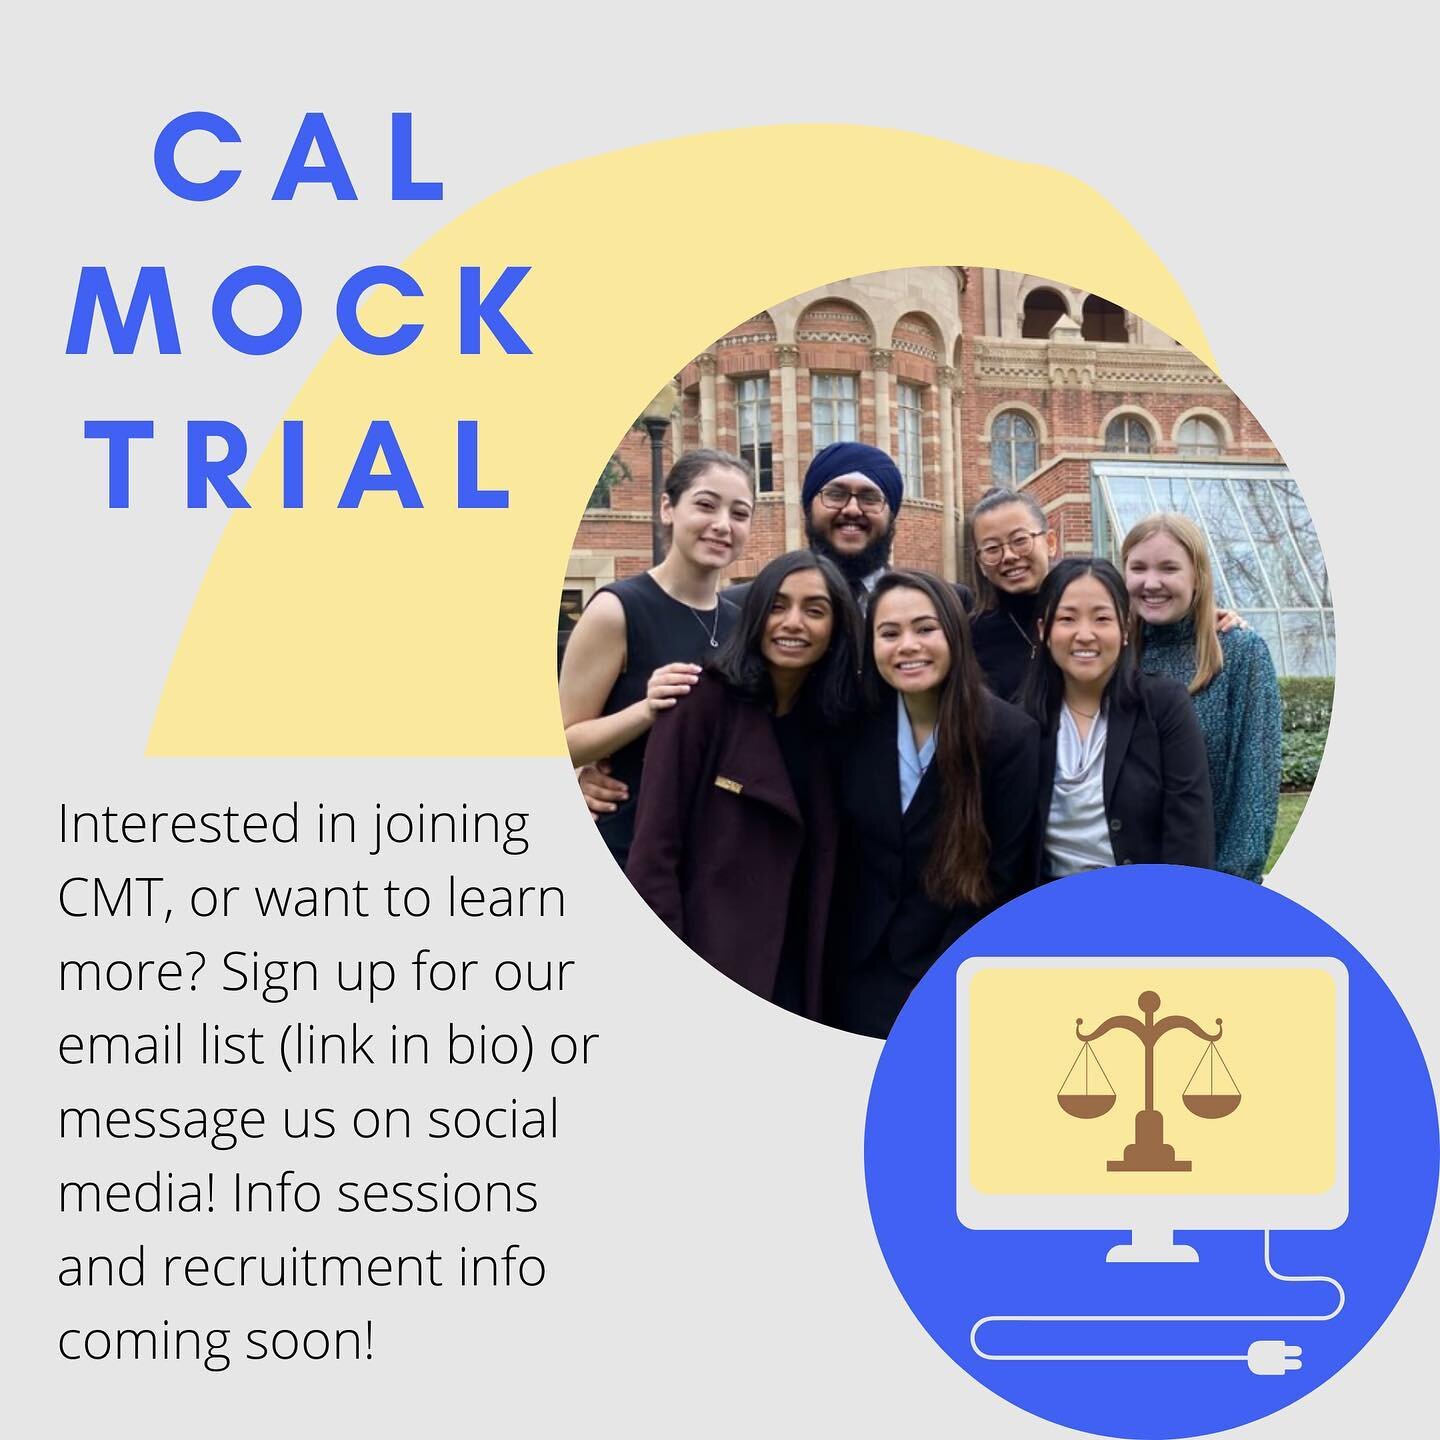 Want to keep up with CMT Recruitment? Sign up for our contact list!